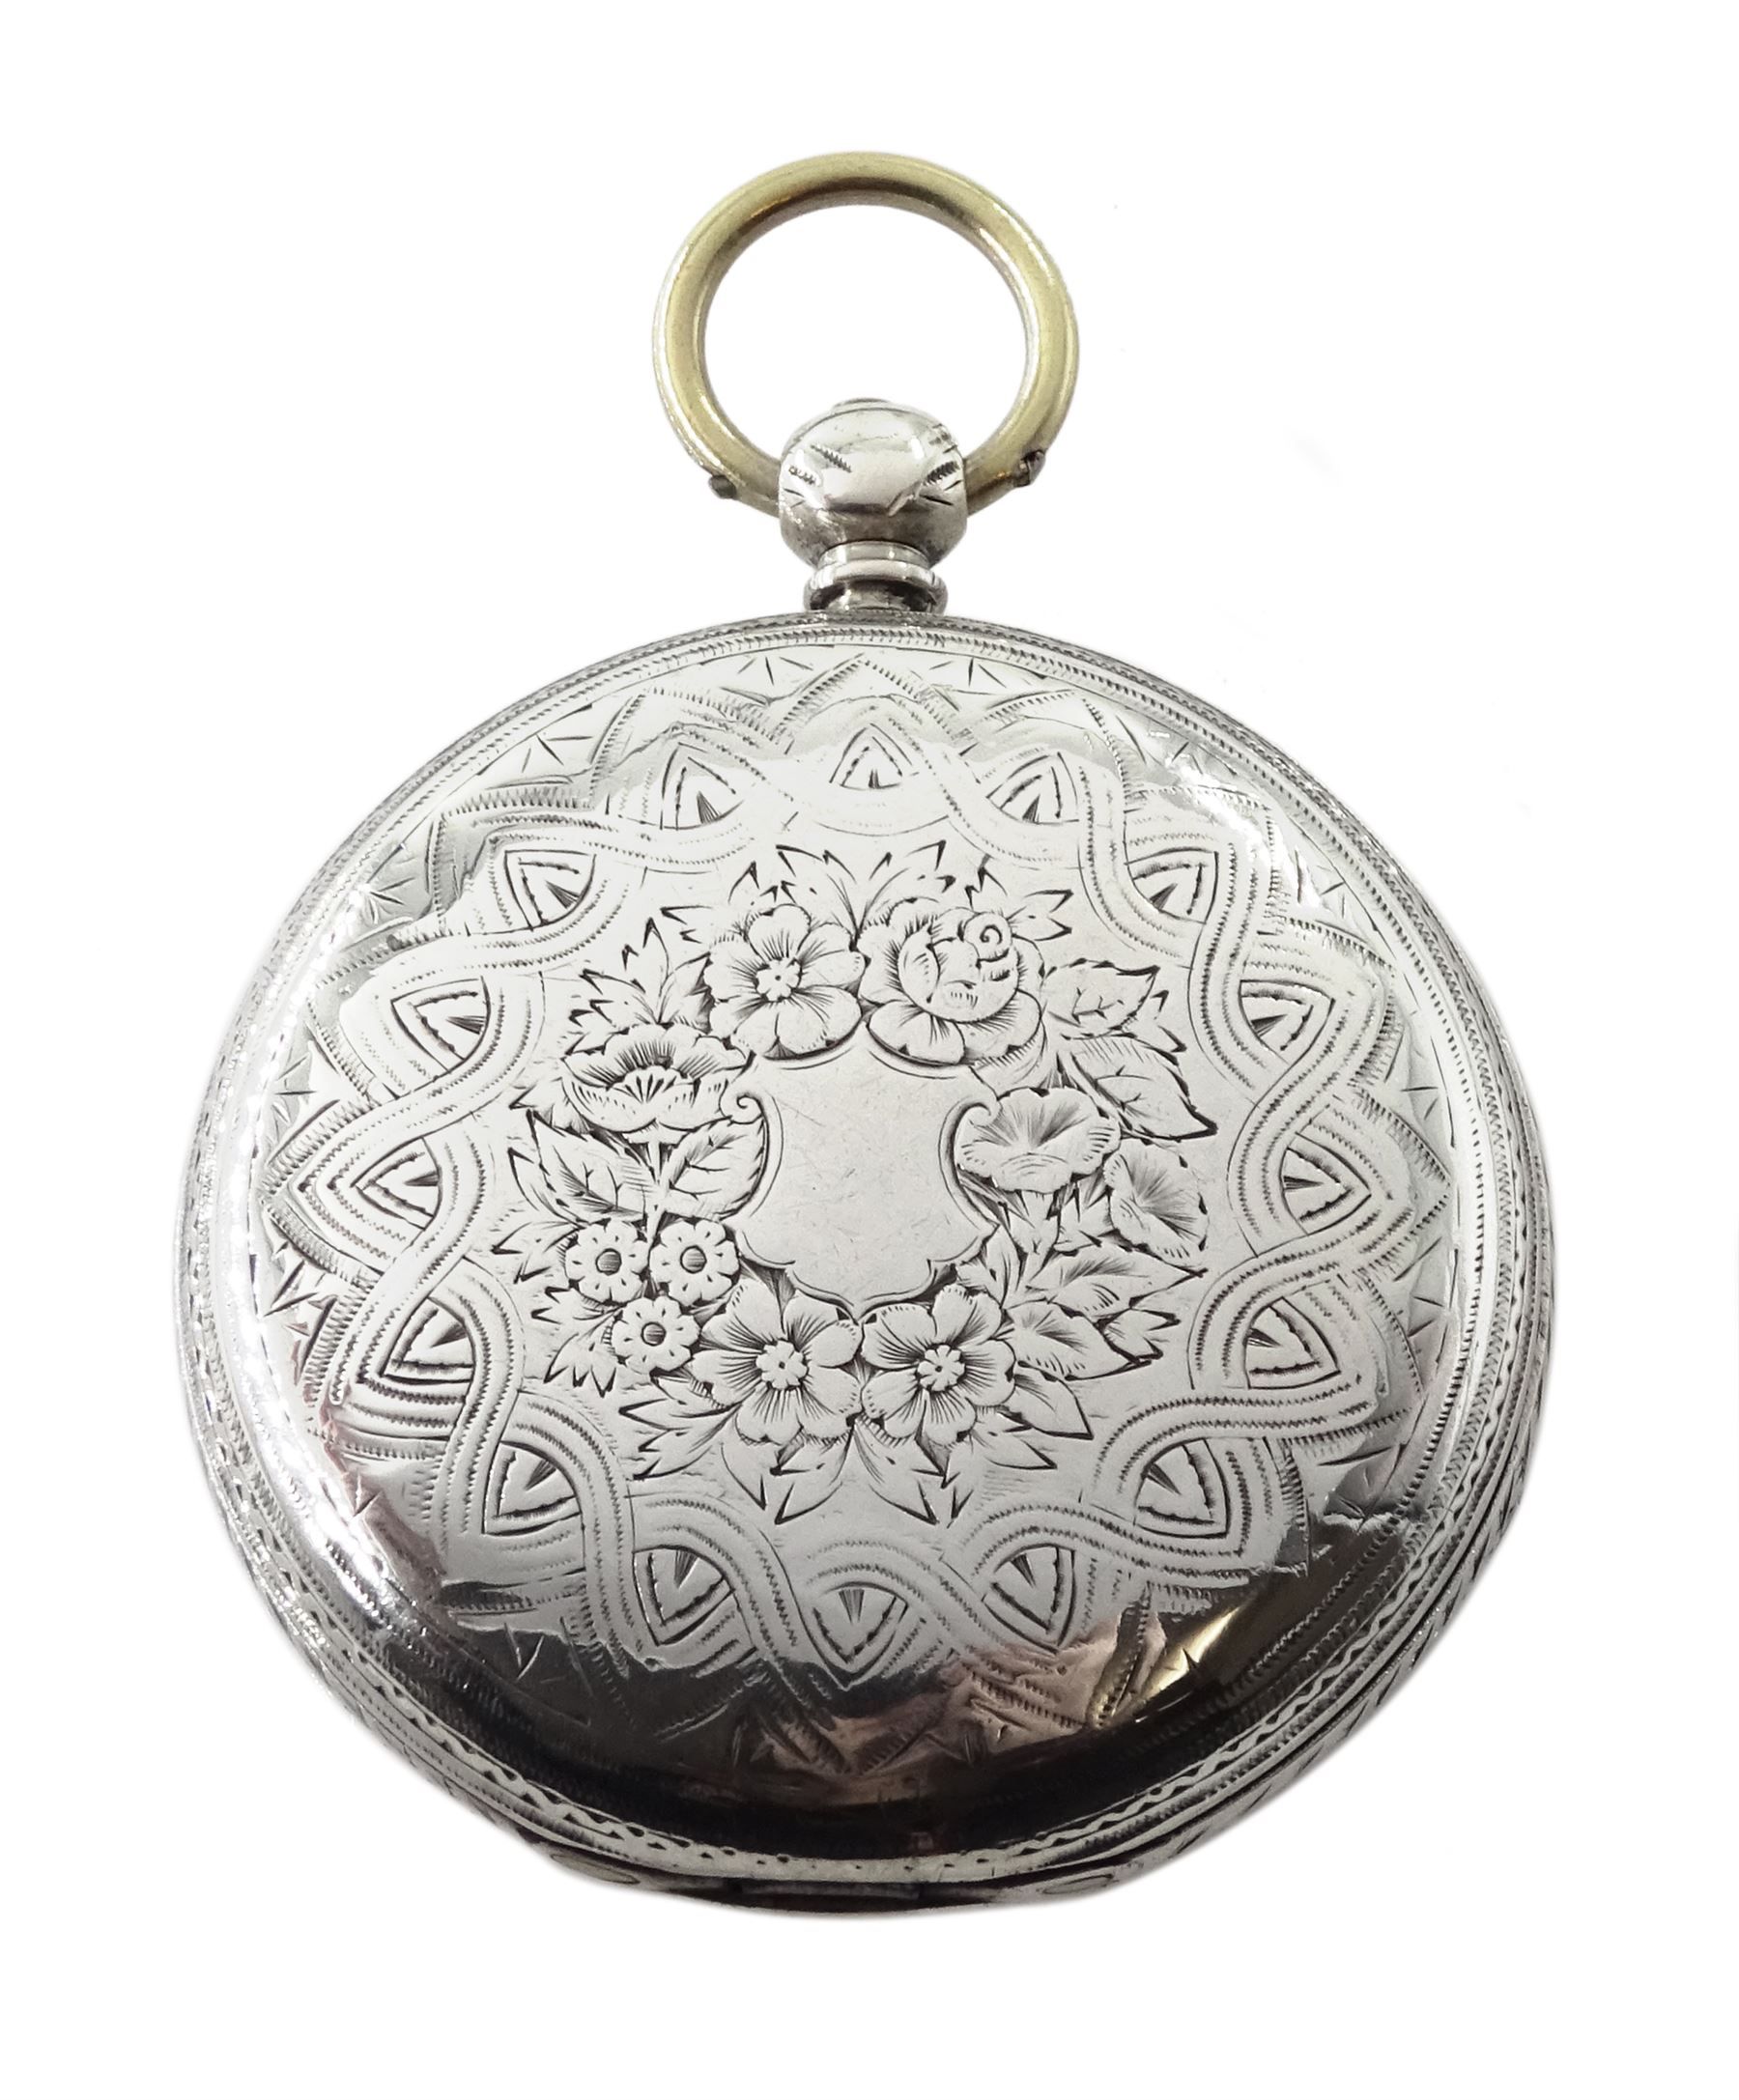 Victorian silver full hunter English lever fusee pocket watch, No. 31818, engraved balance cock with - Image 2 of 5